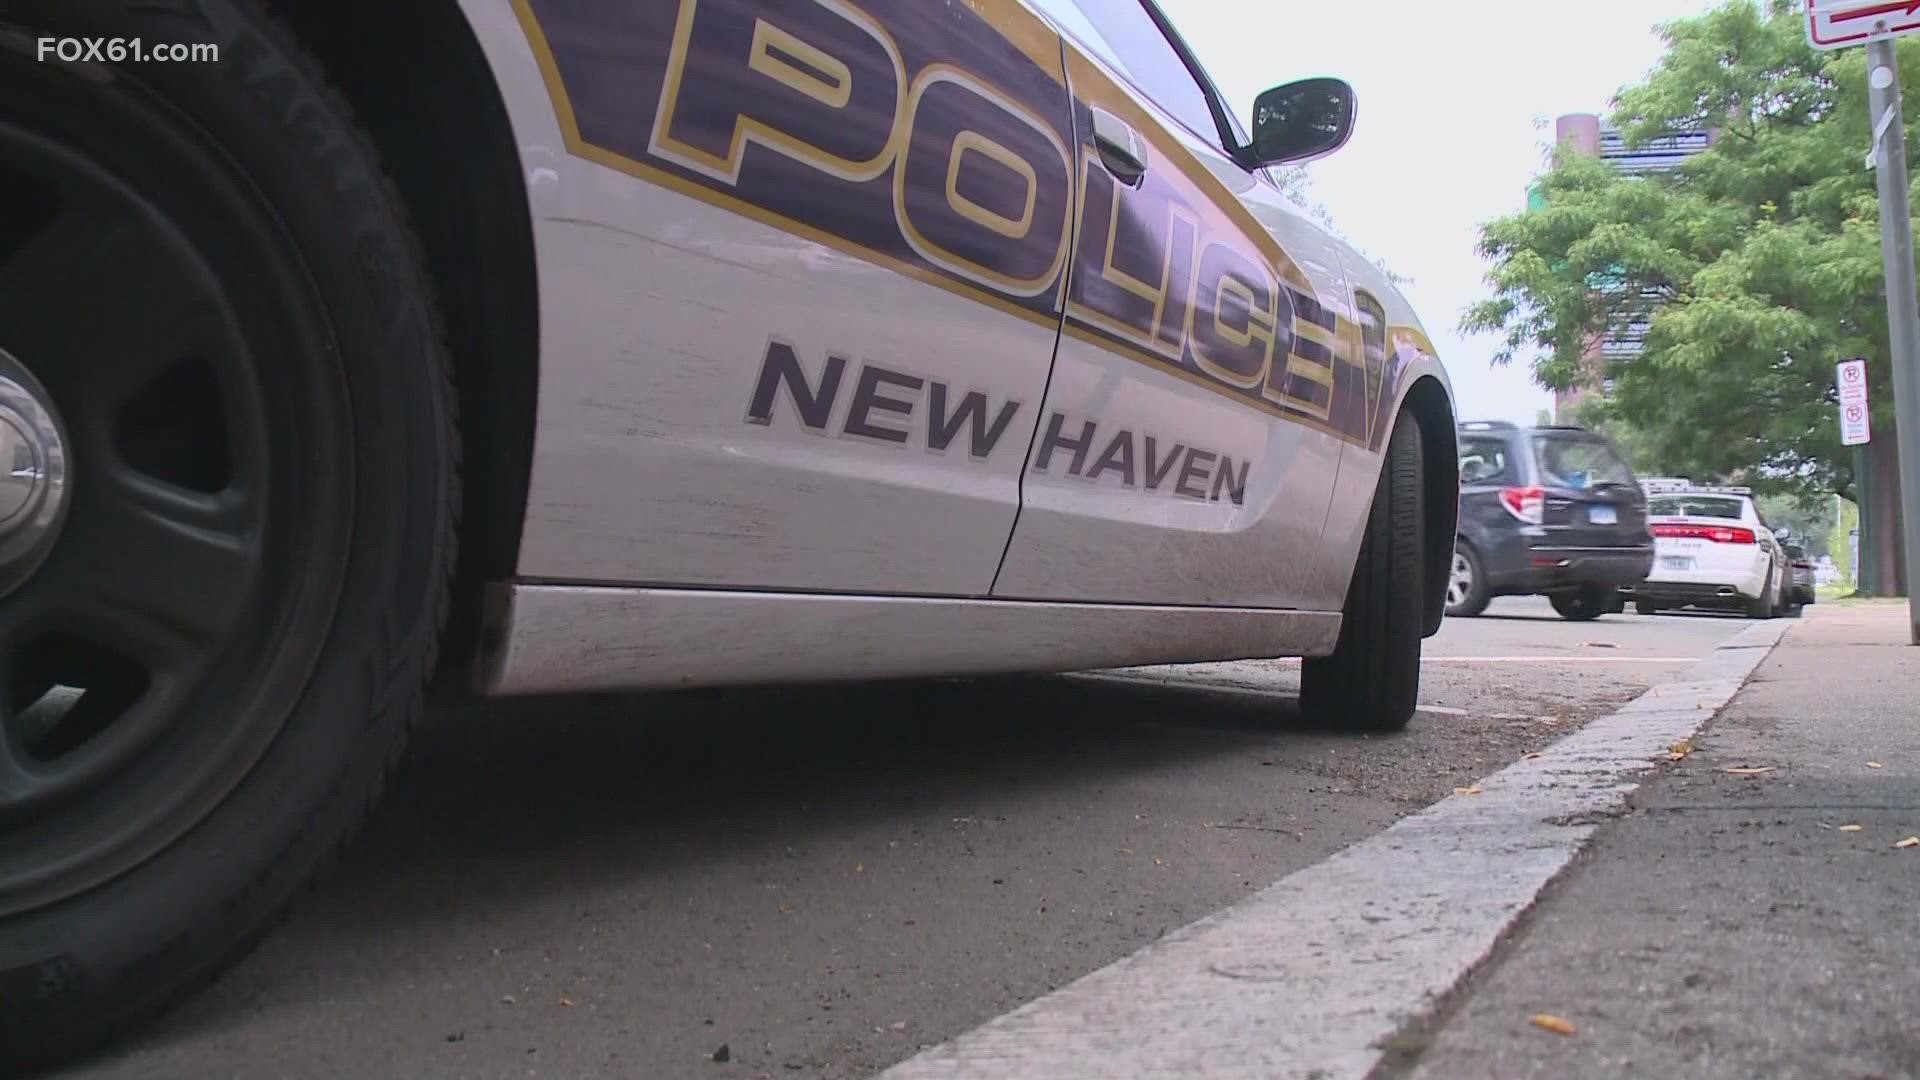 Police are investigating the crash, anyone with information is asked to call the New Haven Police Department.